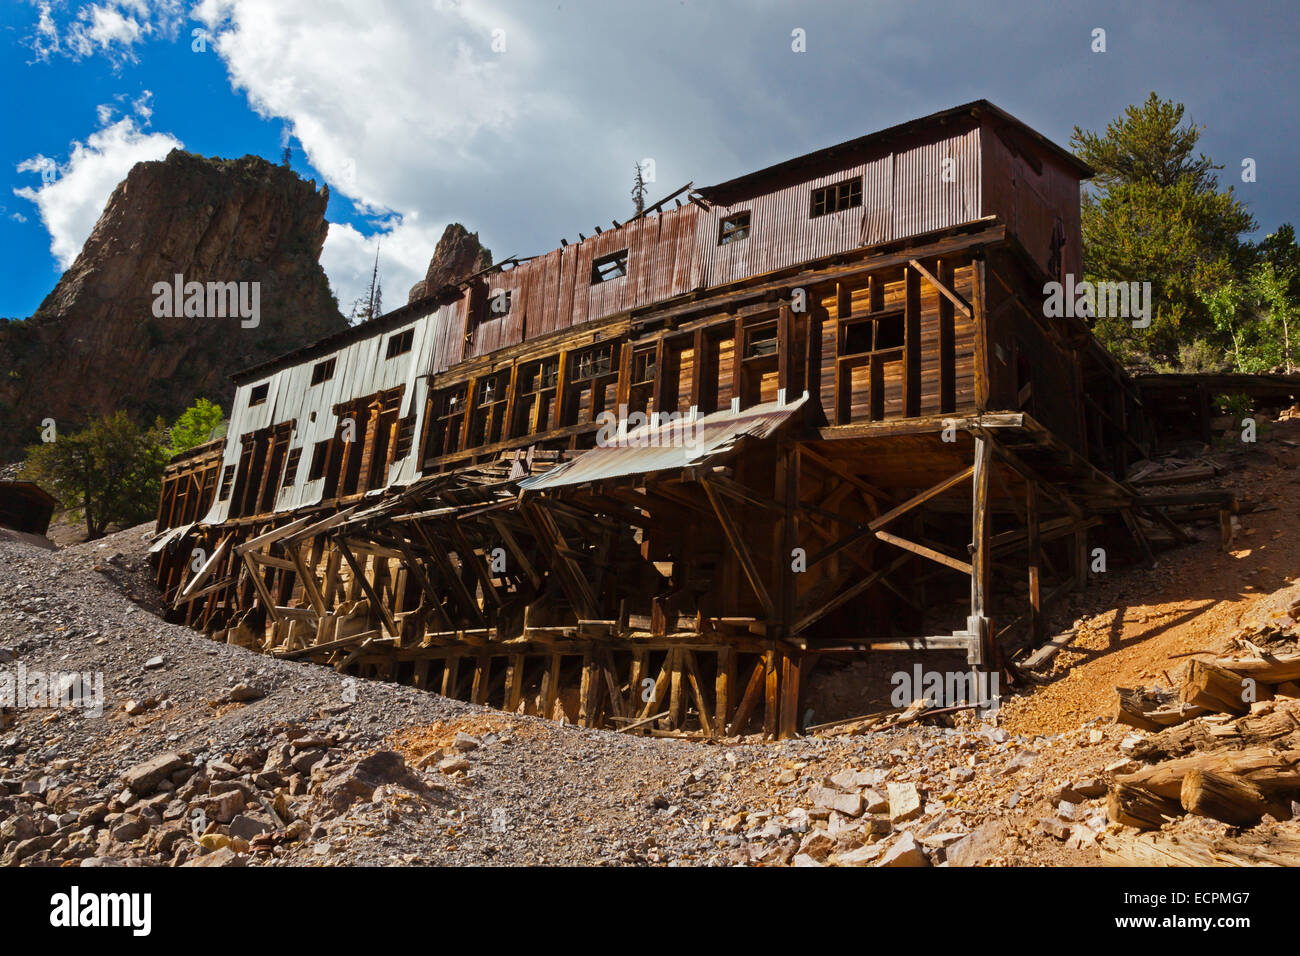 The AMETHYST MINE in CREEDE COLORADO, a silver mining town dating back to the mid 1800's. Stock Photo